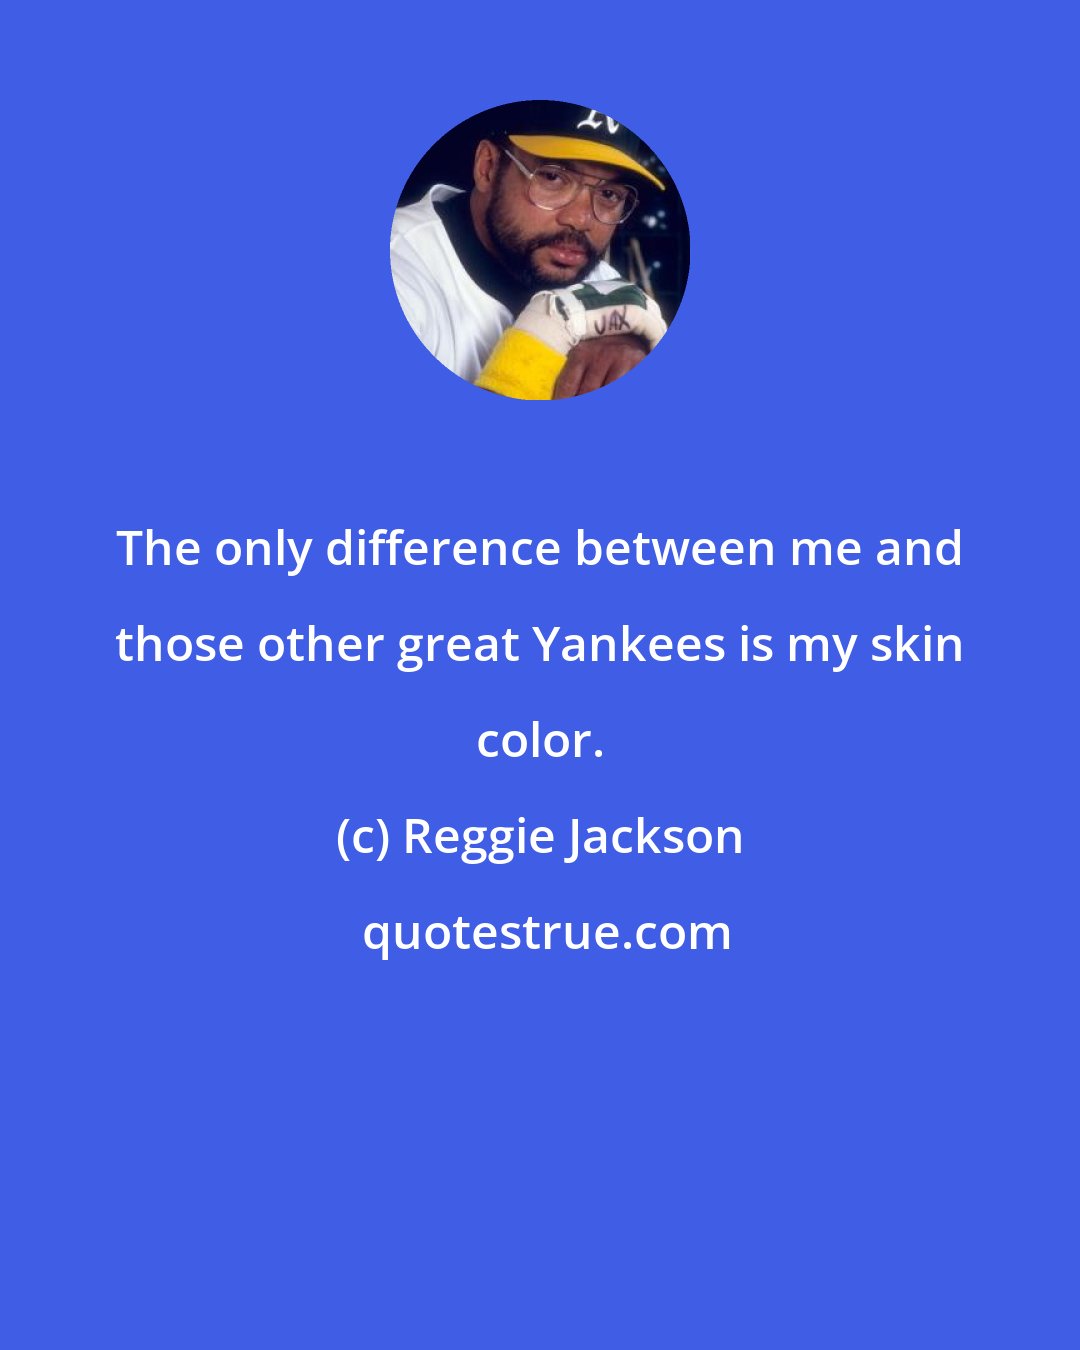 Reggie Jackson: The only difference between me and those other great Yankees is my skin color.